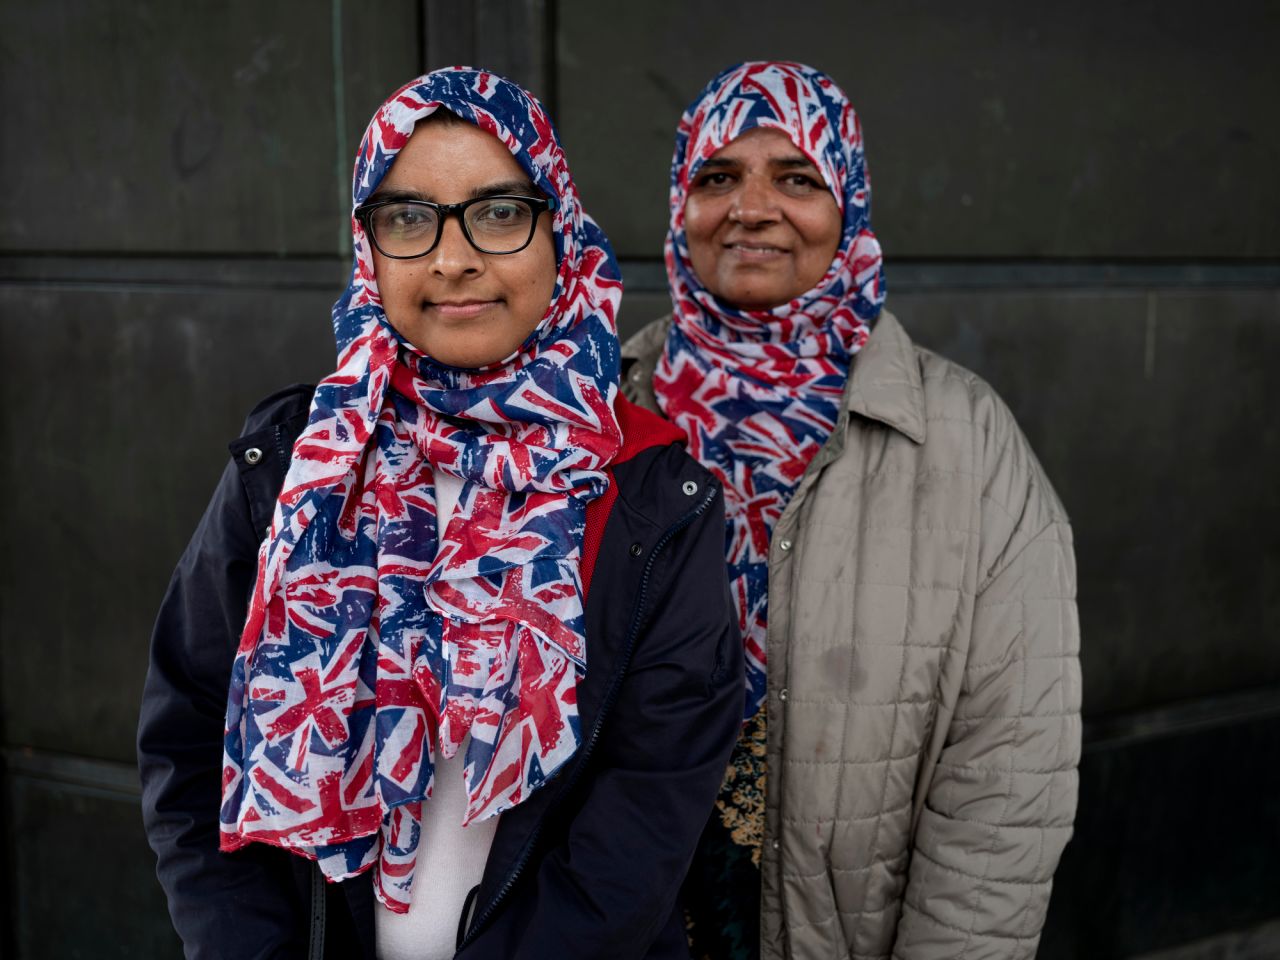 Farkhanda Ahmed and his mother, Shakeela, came from Slough, a town in Berkshire, England. 